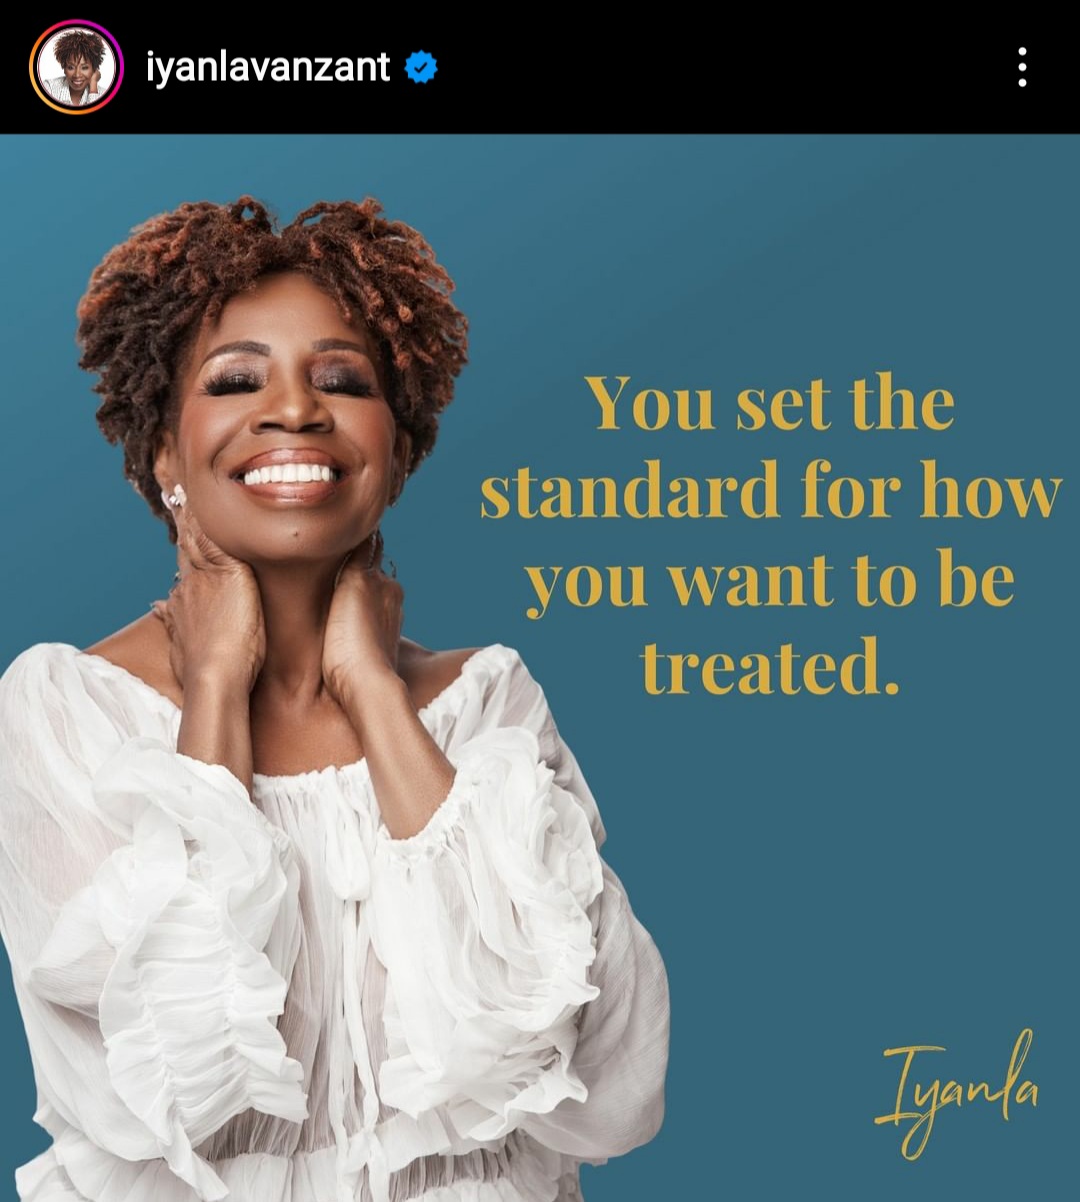 You set the standard for how you want to be treated. Iyanla Vanzant, coaching tip